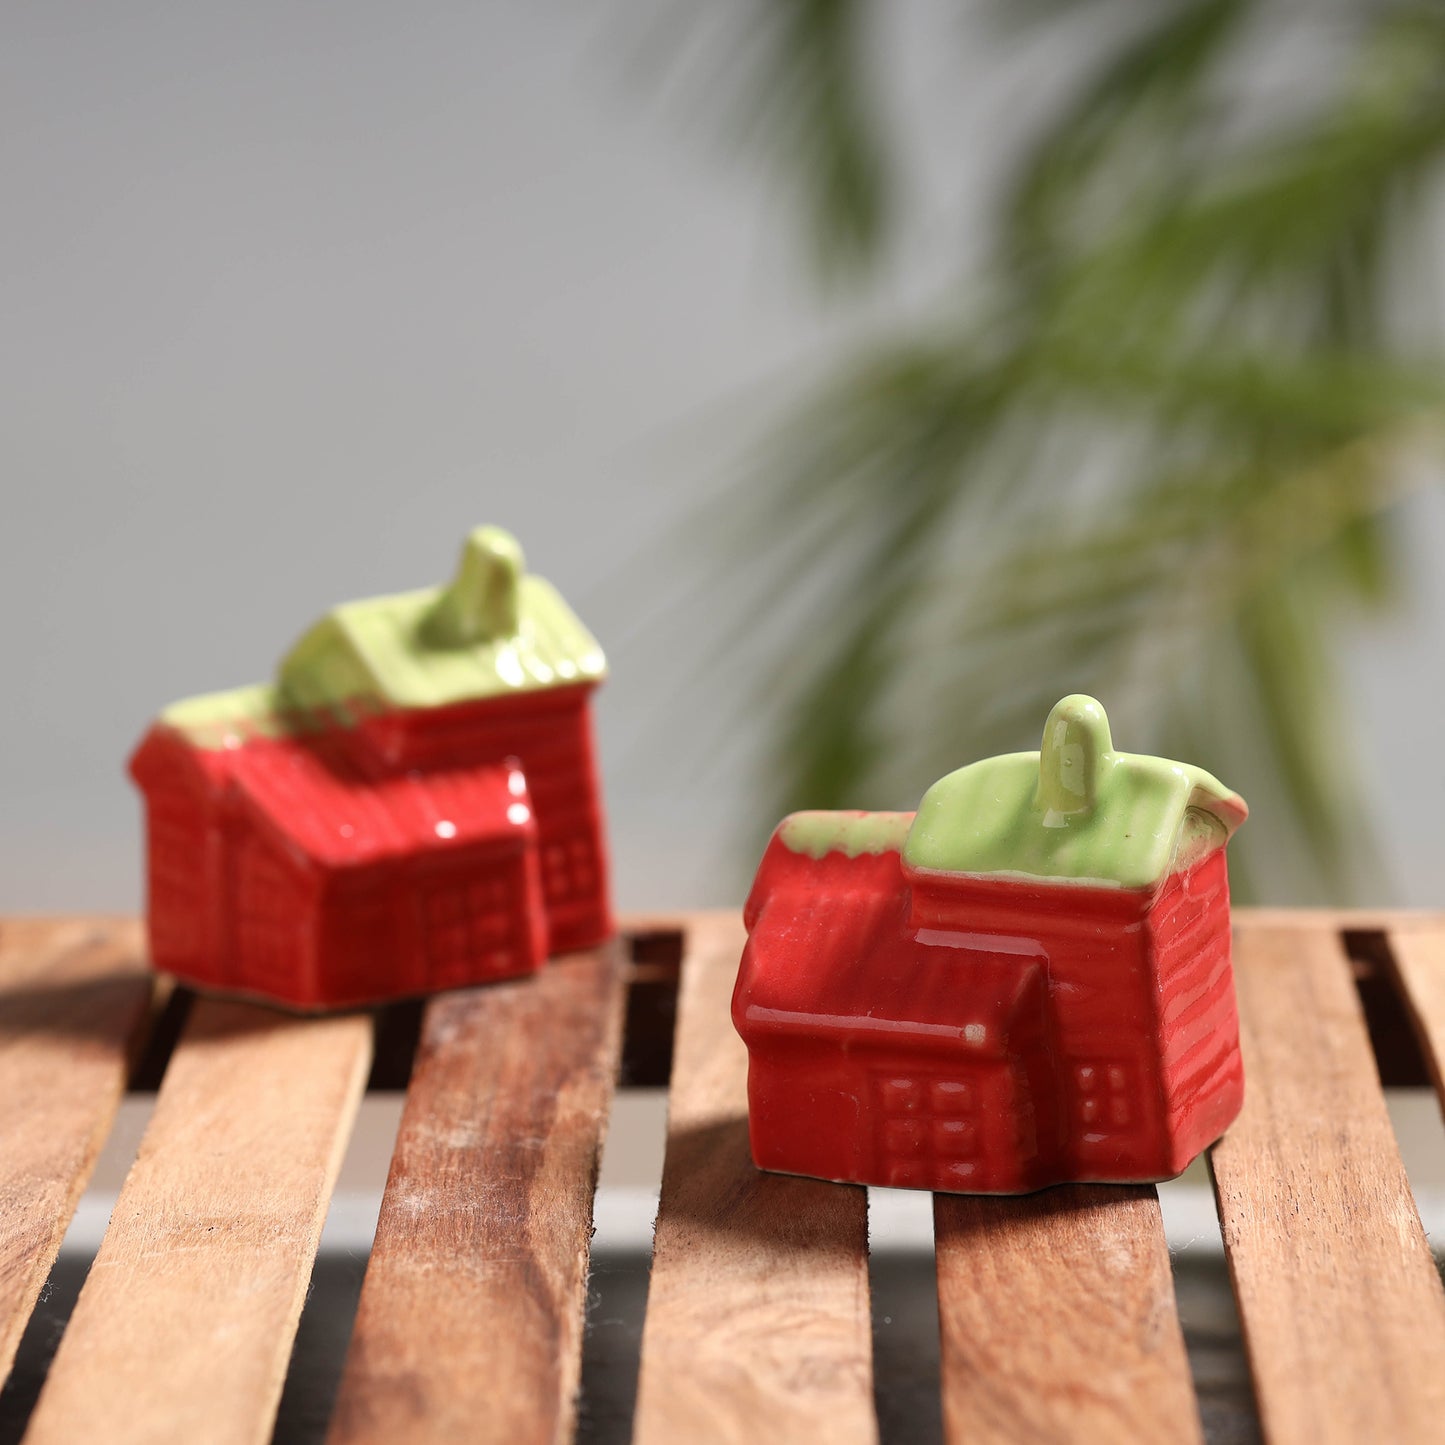 Hut - Handcrafted Ceramic Toys (Set of 2)